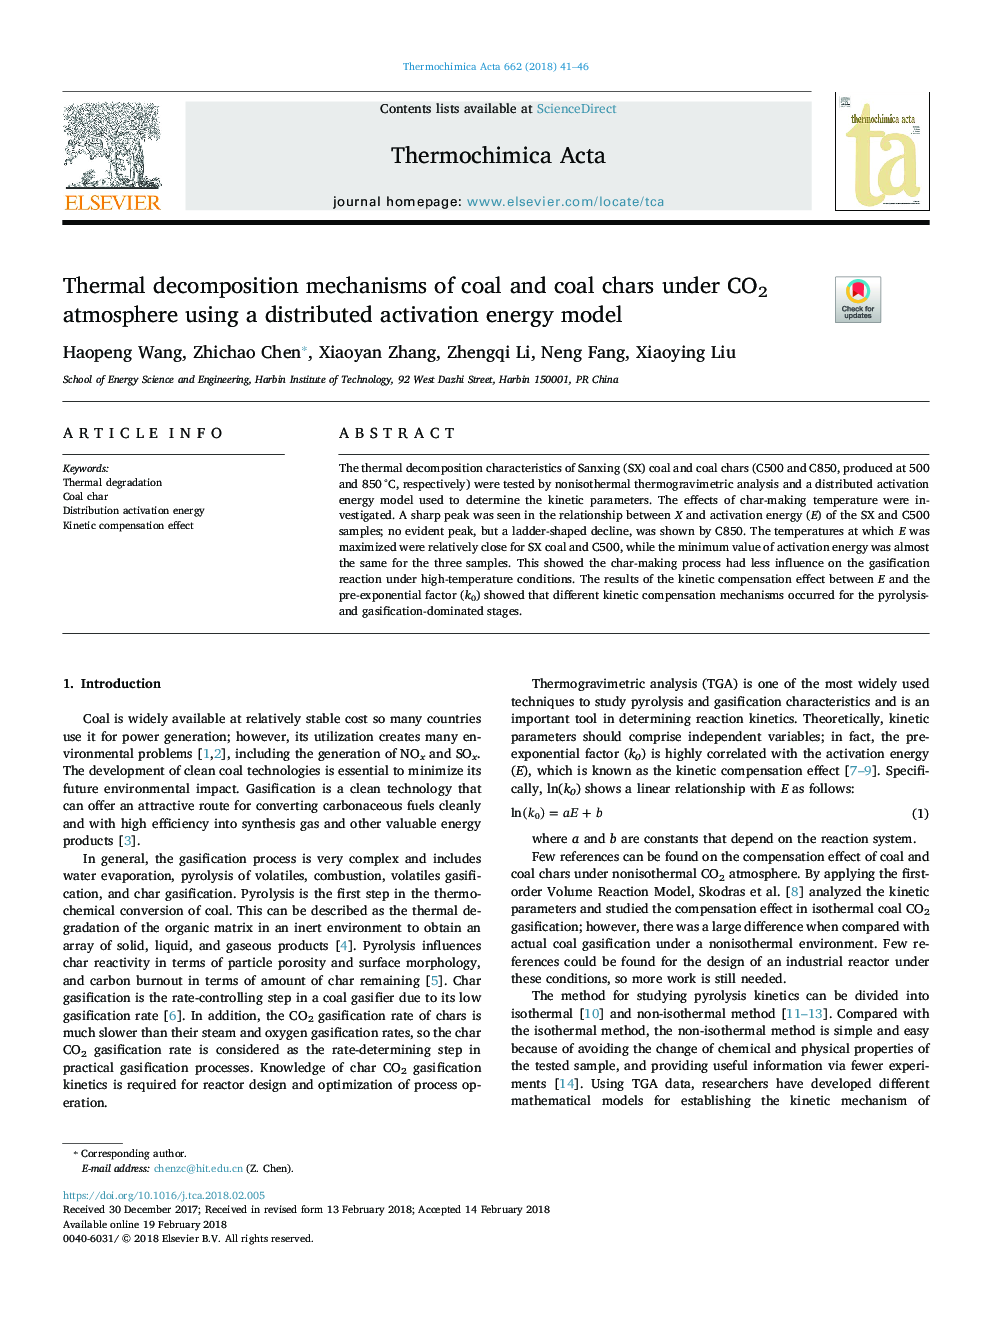 Thermal decomposition mechanisms of coal and coal chars under CO2 atmosphere using a distributed activation energy model